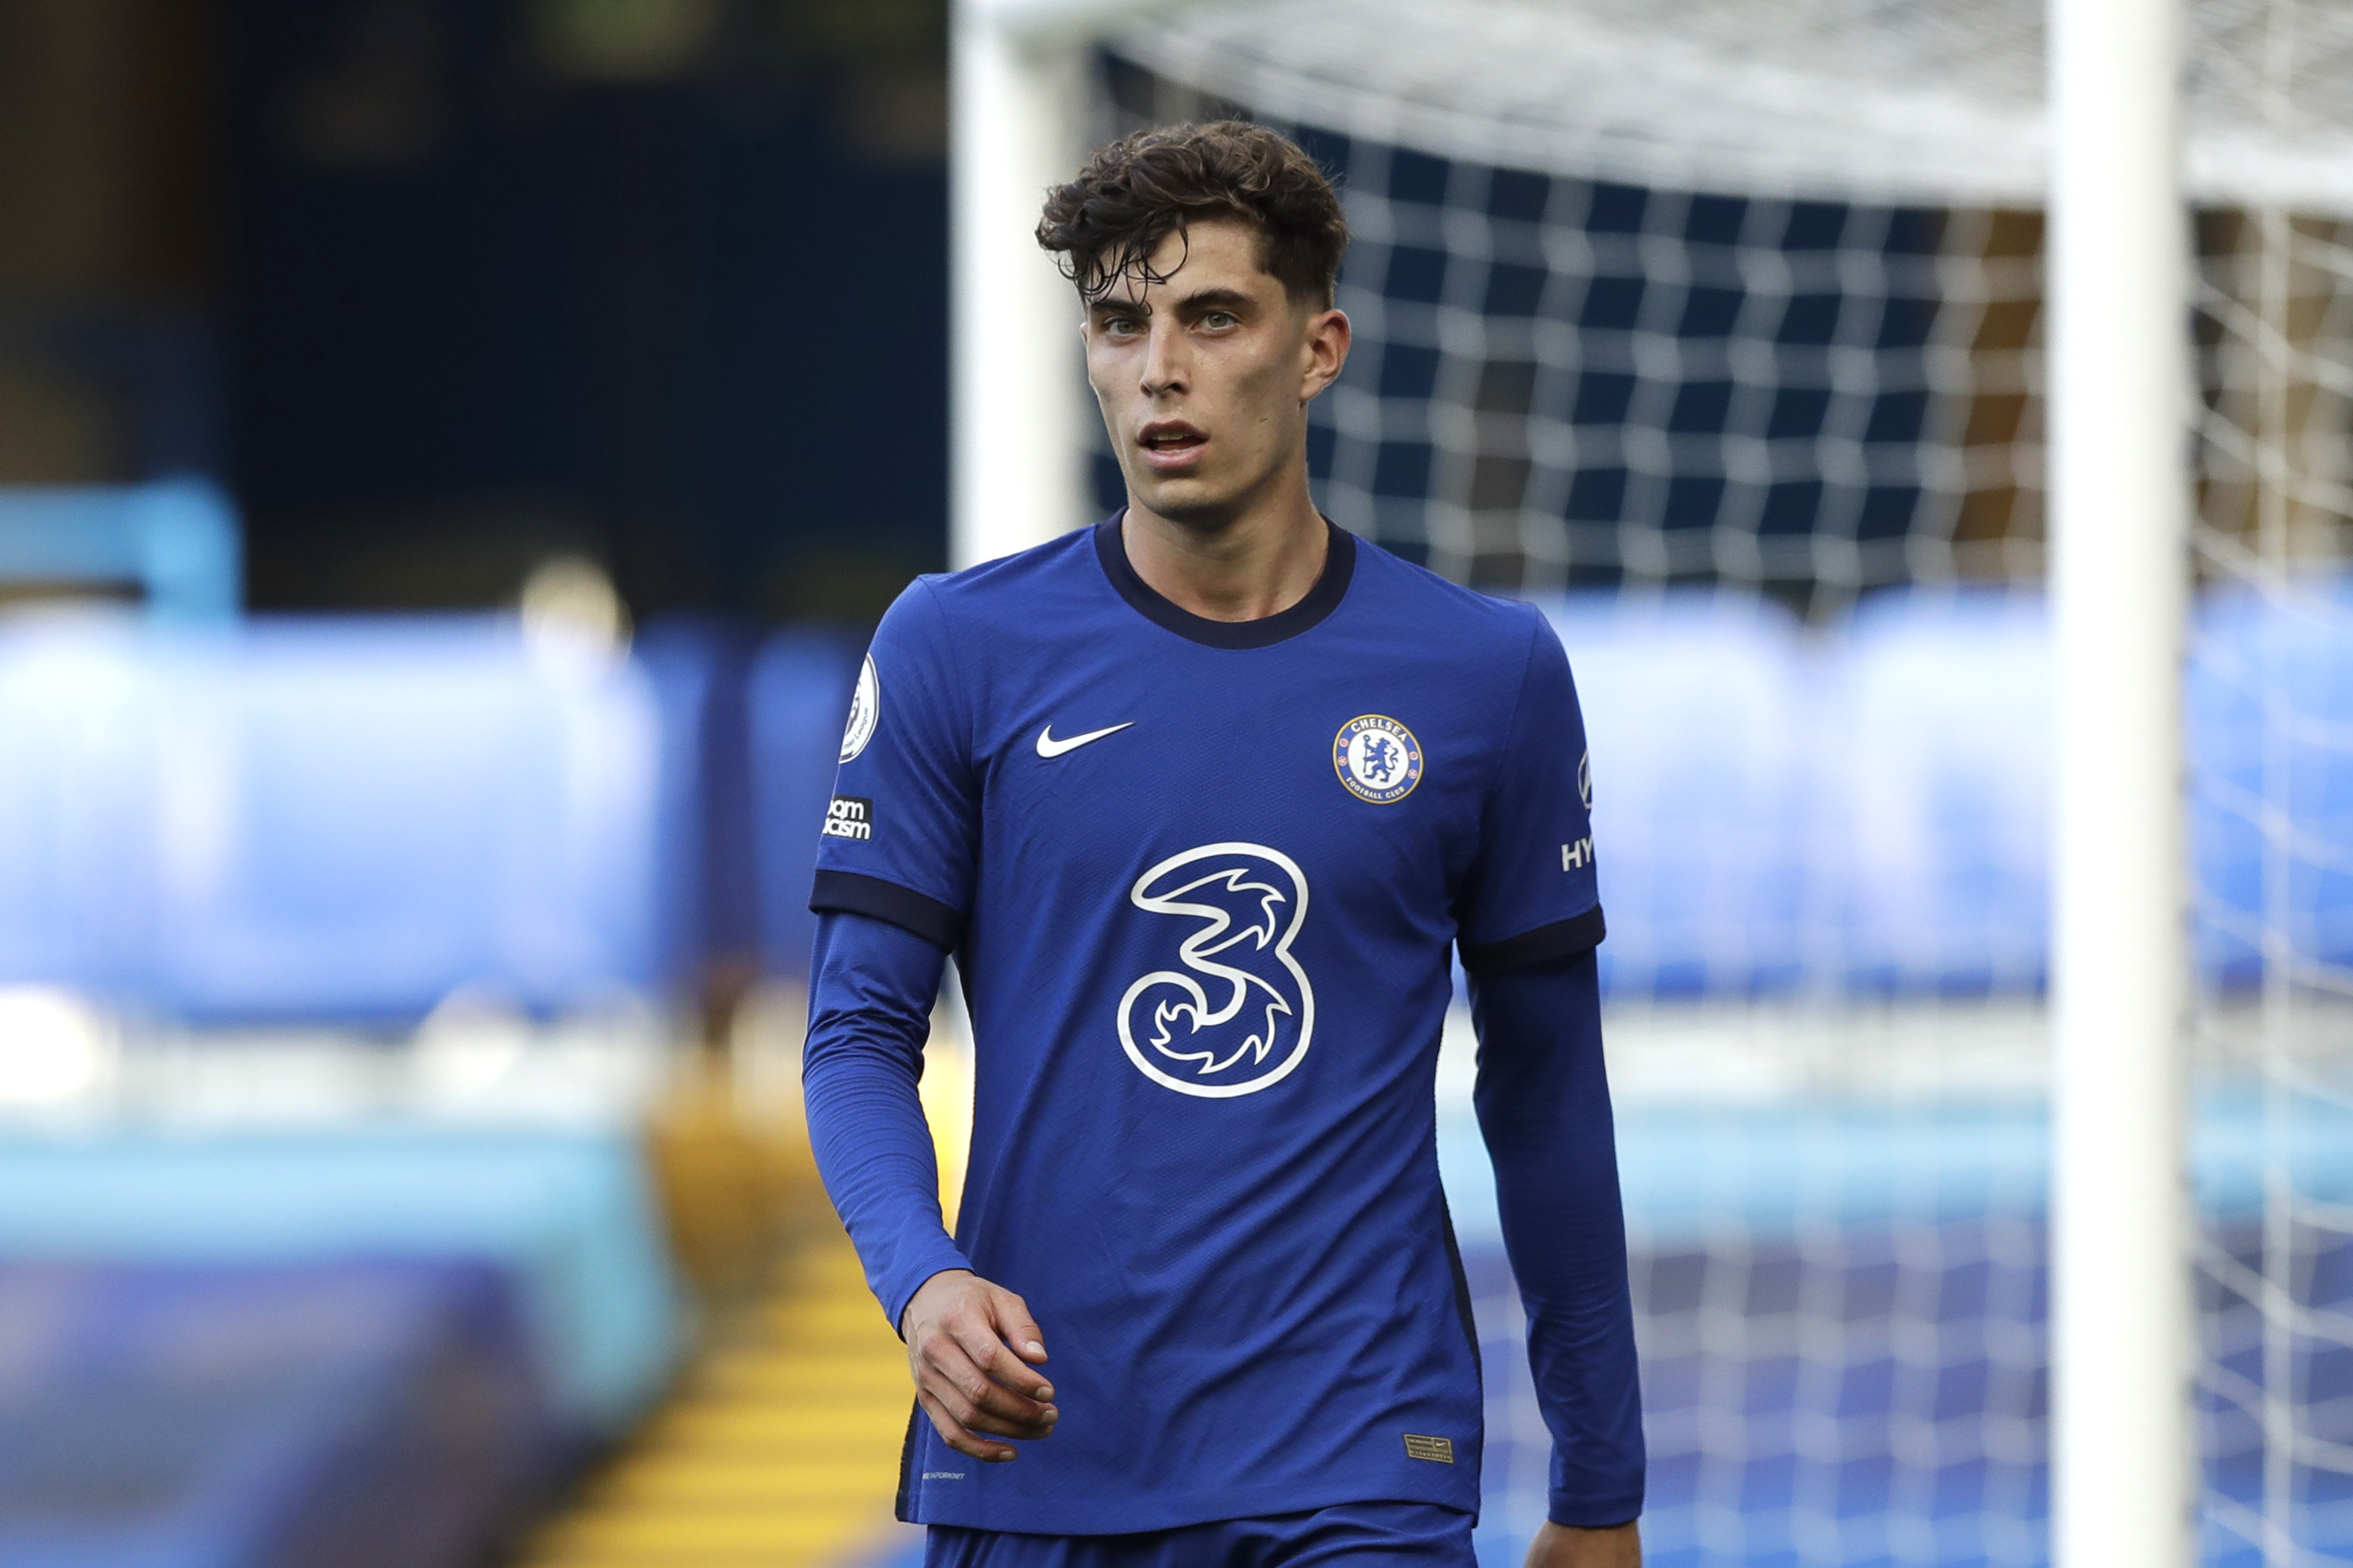 Blues’ Star Havertz Makes Bold Claim That Chelsea Titles Are ‘Worth.